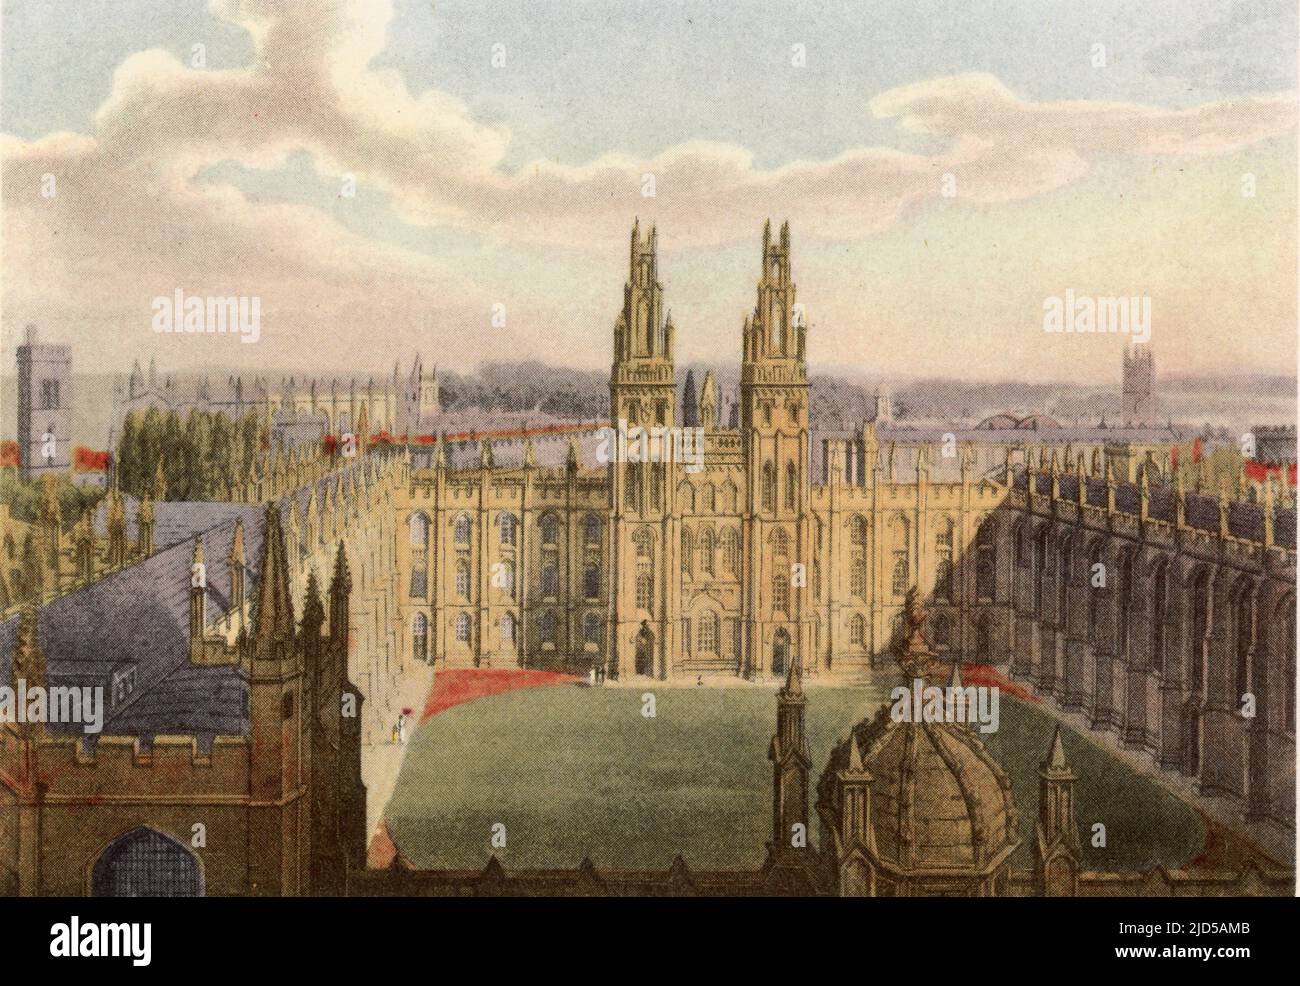 All Souls College, 1814. All Souls College is a constituent college of the University of Oxford in England. A print from 'A History of the University of Oxford, its Colleges, Halls, and Public Buildings', published by Rudolph Ackermann, 1814. Ilustrated by Augustus Pugin, F. Mackenzie and others. Stock Photo